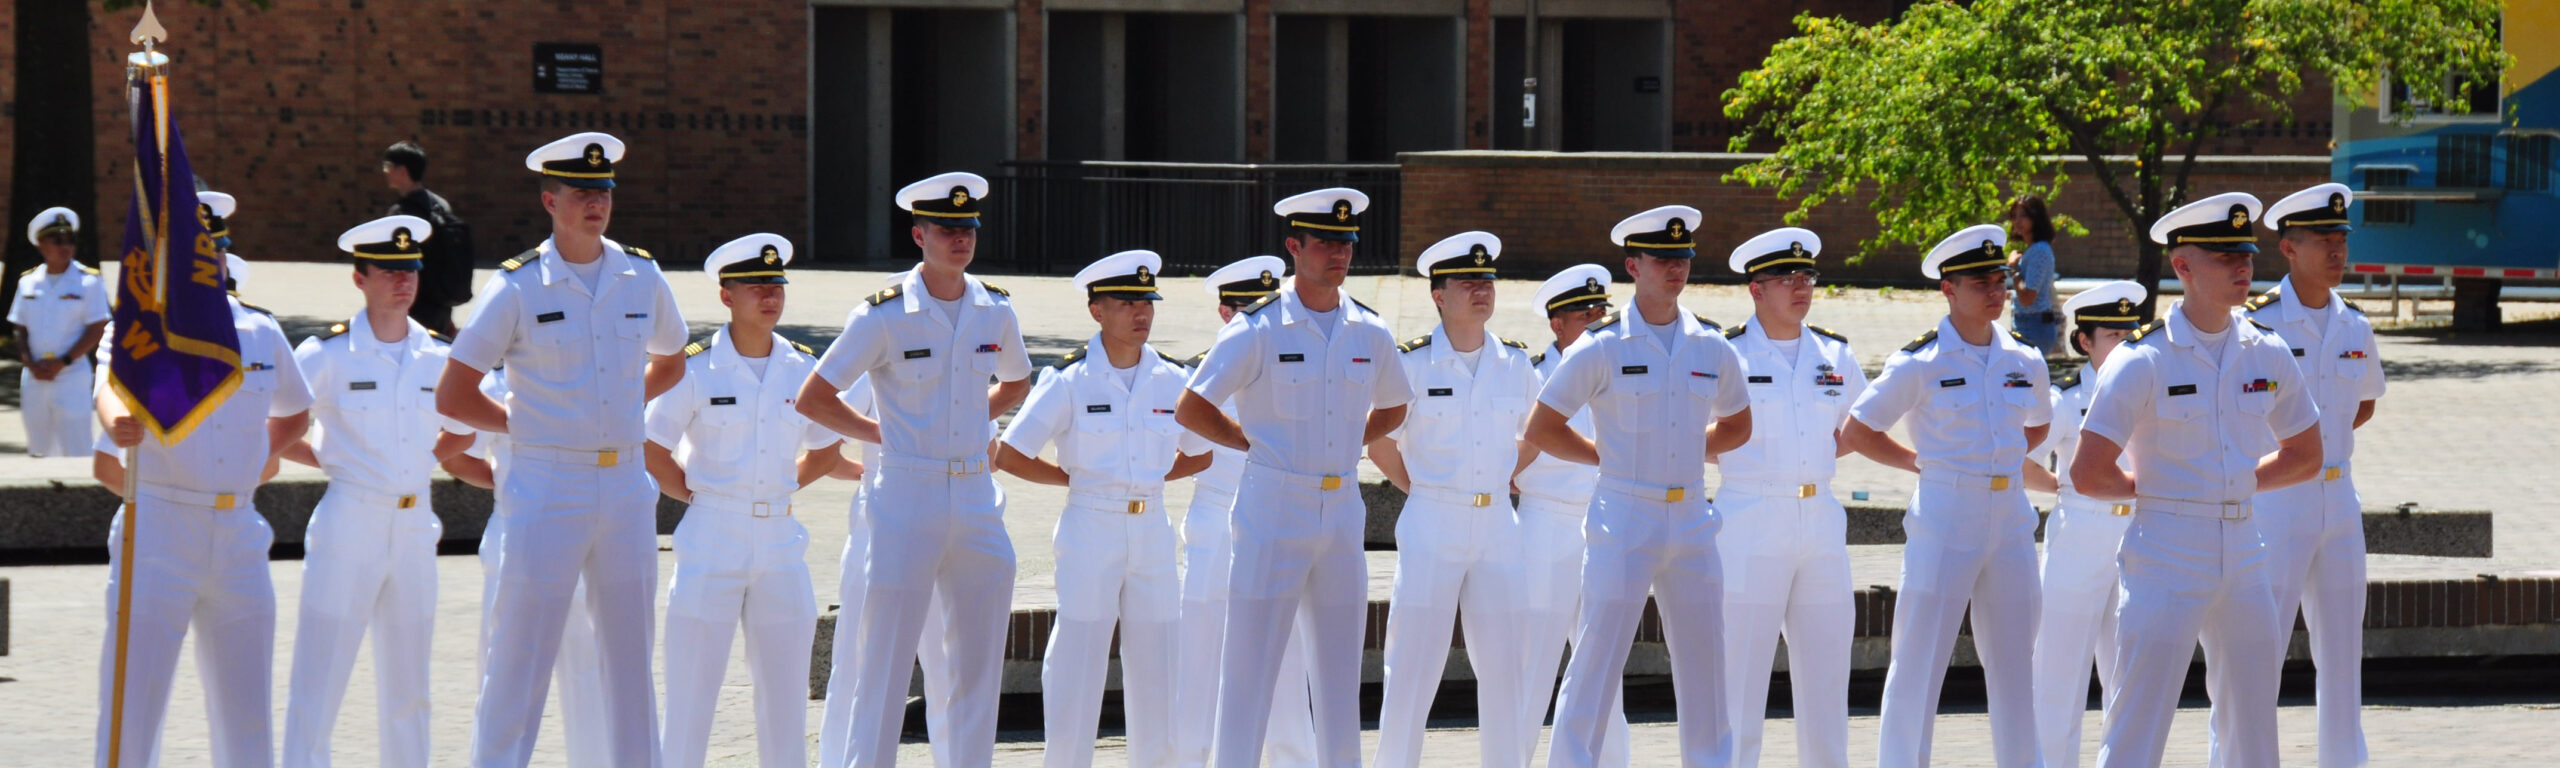 Ensigns Complete Junior Officer of the Deck Pilot Course to